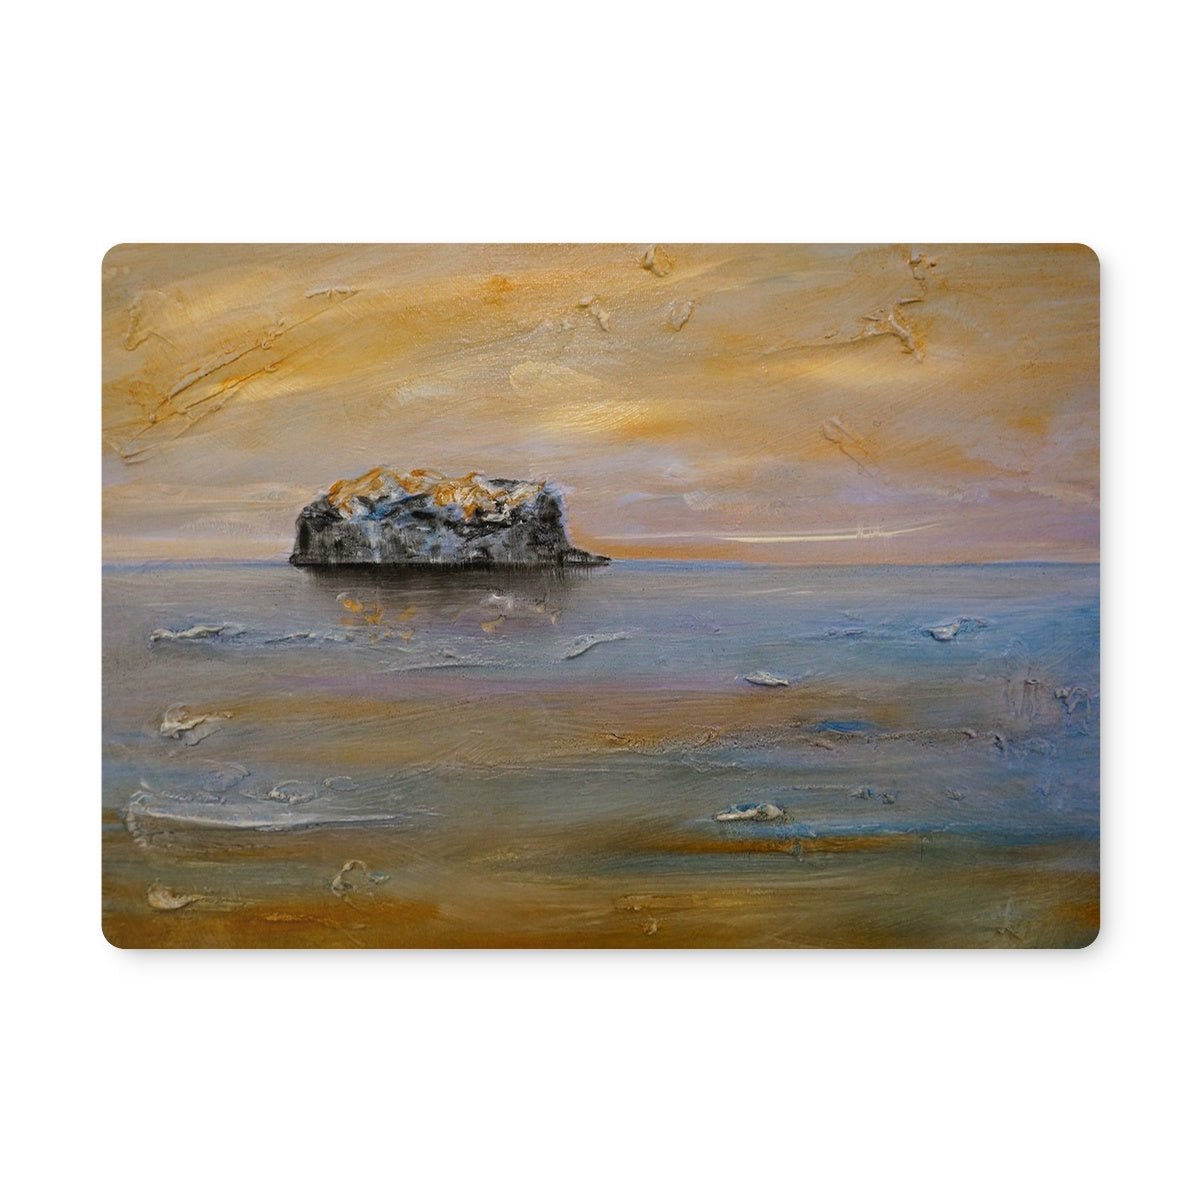 Bass Rock Dawn Art Gifts Placemat-Placemats-Edinburgh & Glasgow Art Gallery-4 Placemats-Paintings, Prints, Homeware, Art Gifts From Scotland By Scottish Artist Kevin Hunter